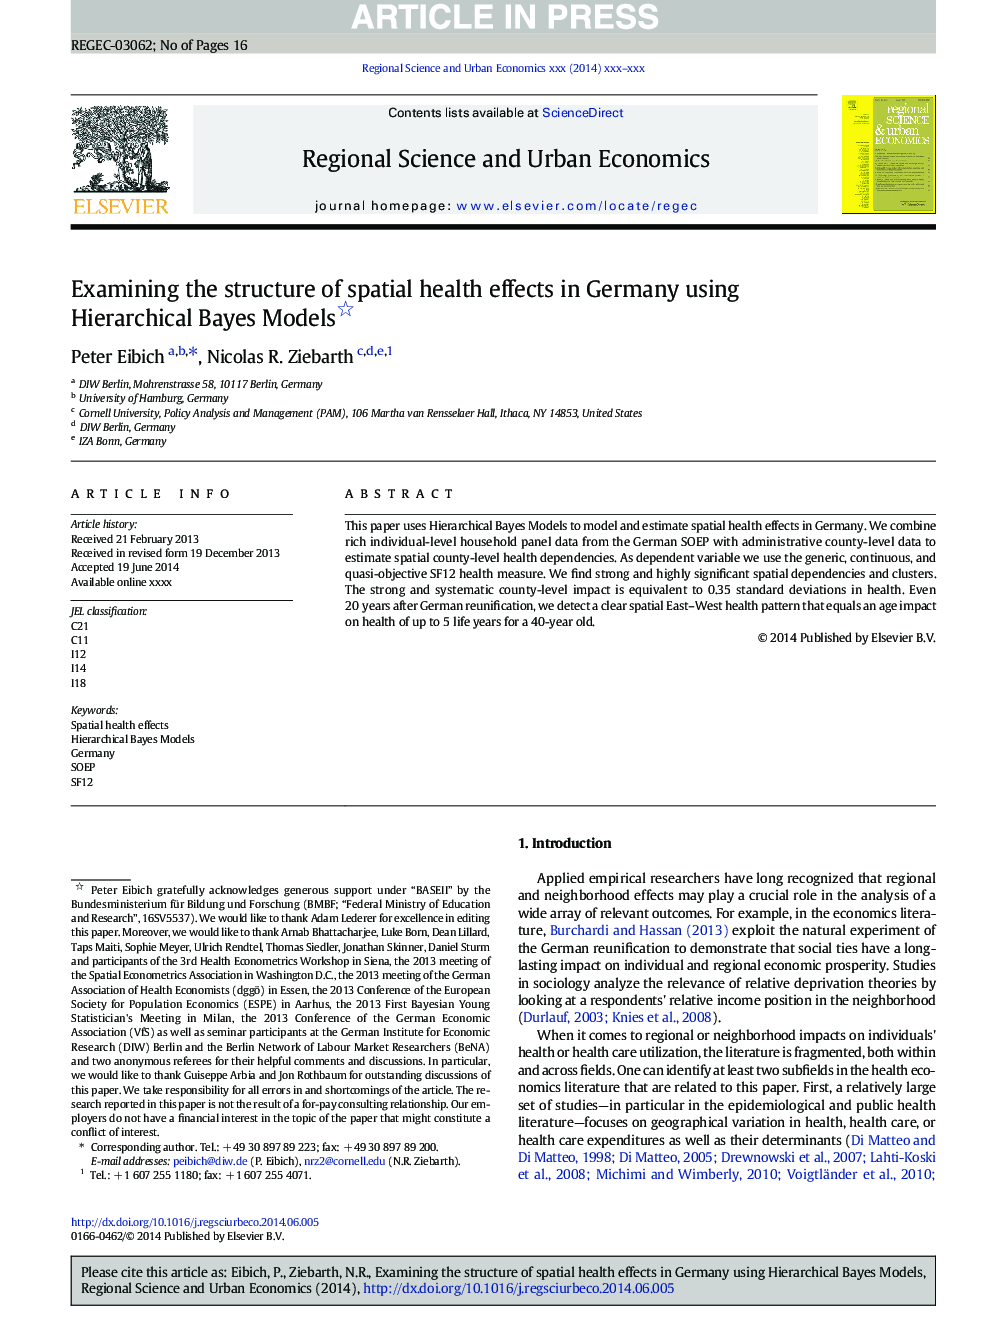 Examining the structure of spatial health effects in Germany using Hierarchical Bayes Models